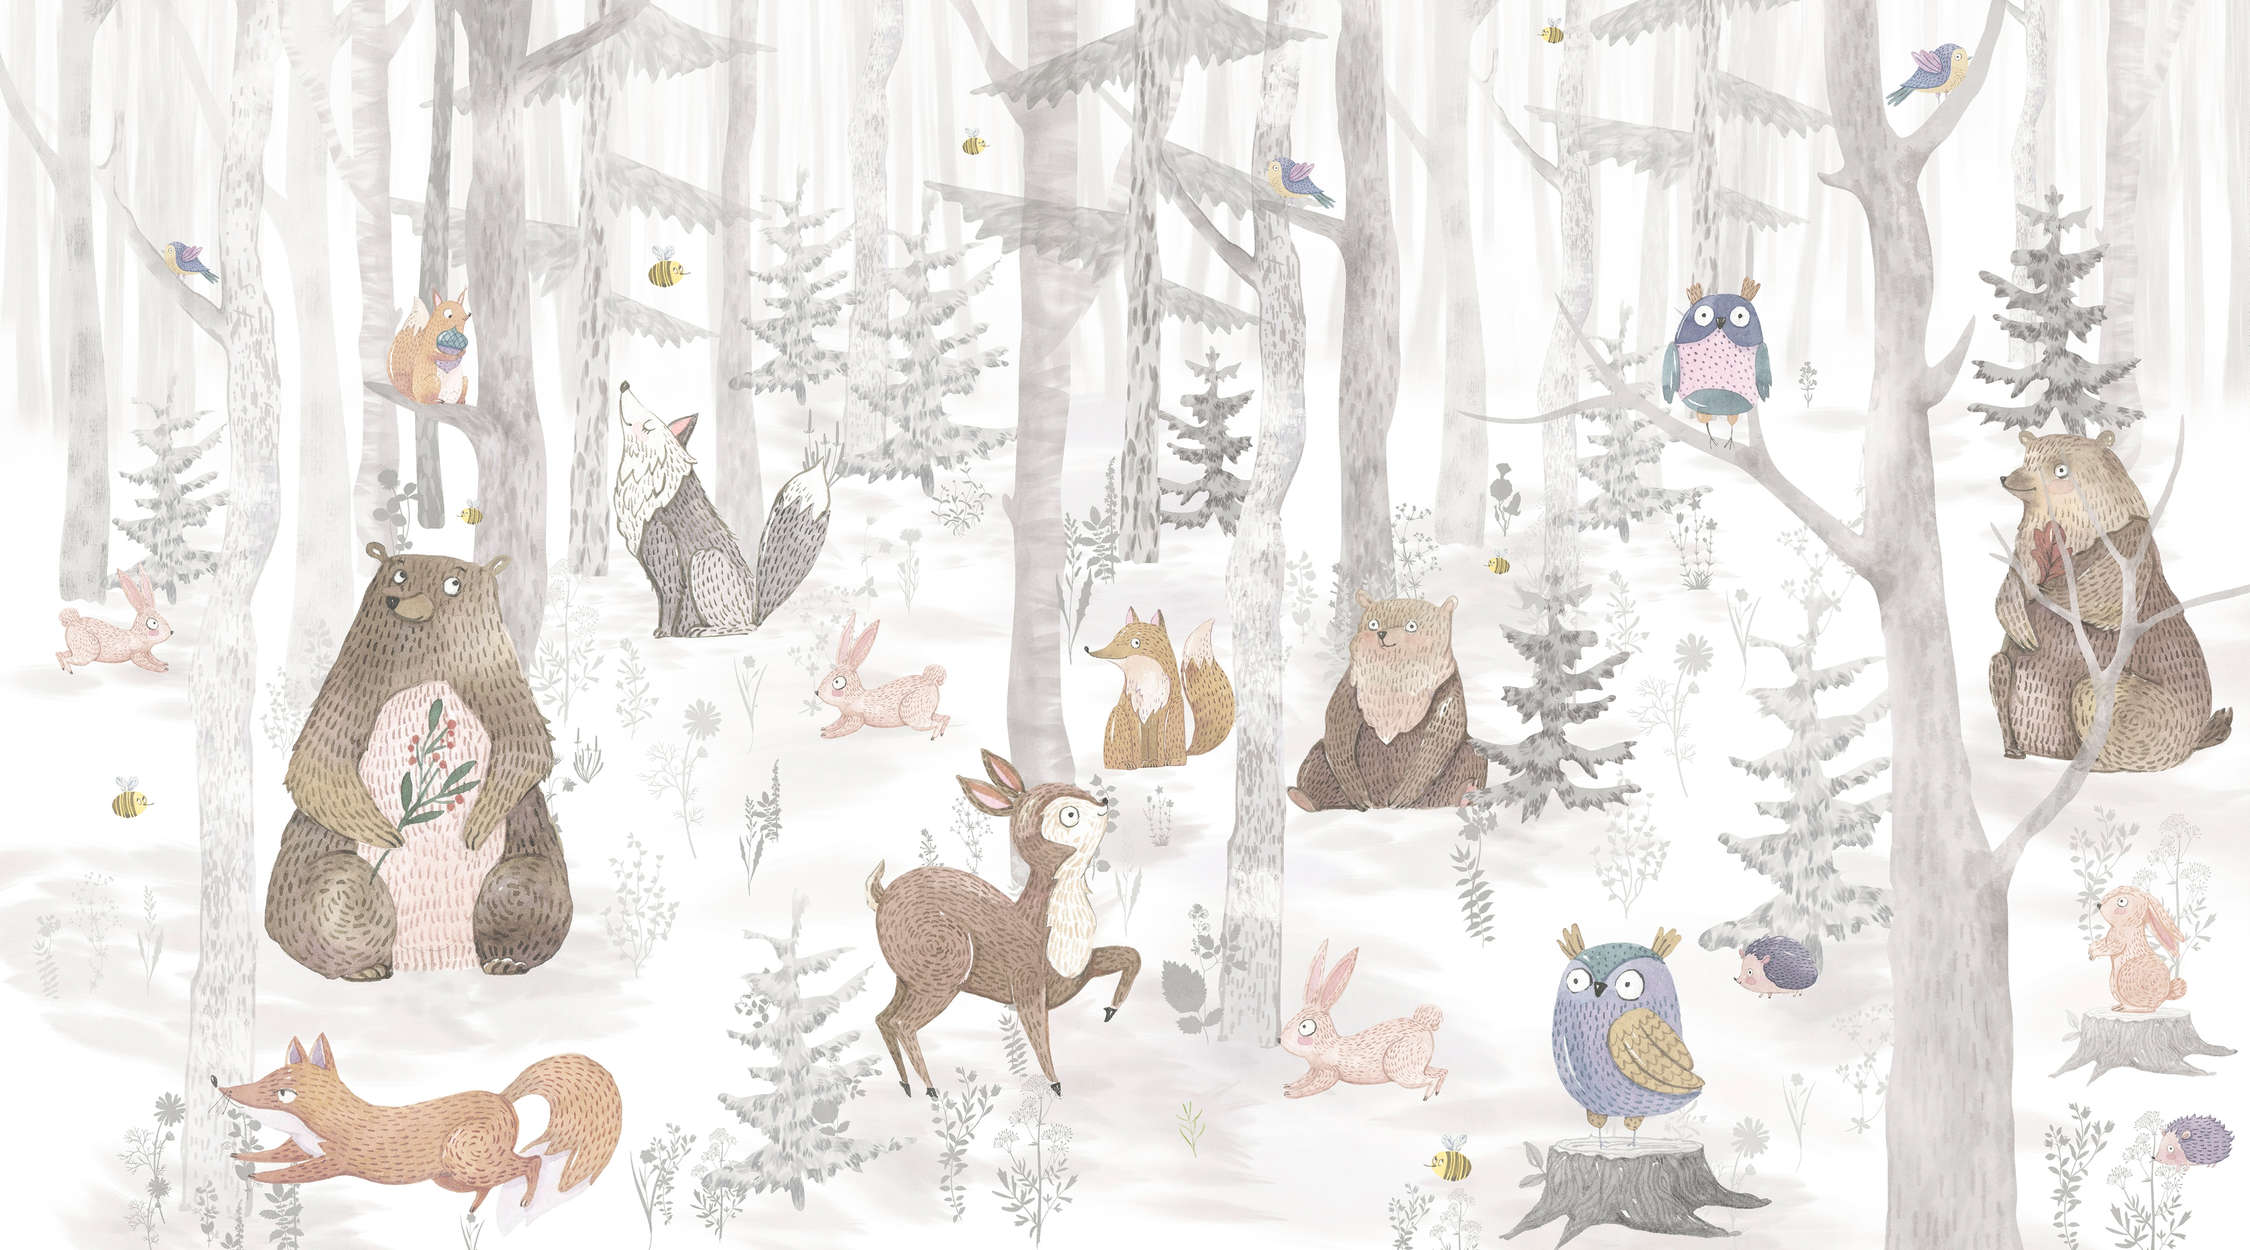             Magic Forest with Animals Wallpaper - Smooth & Light Glossy Non-woven
        